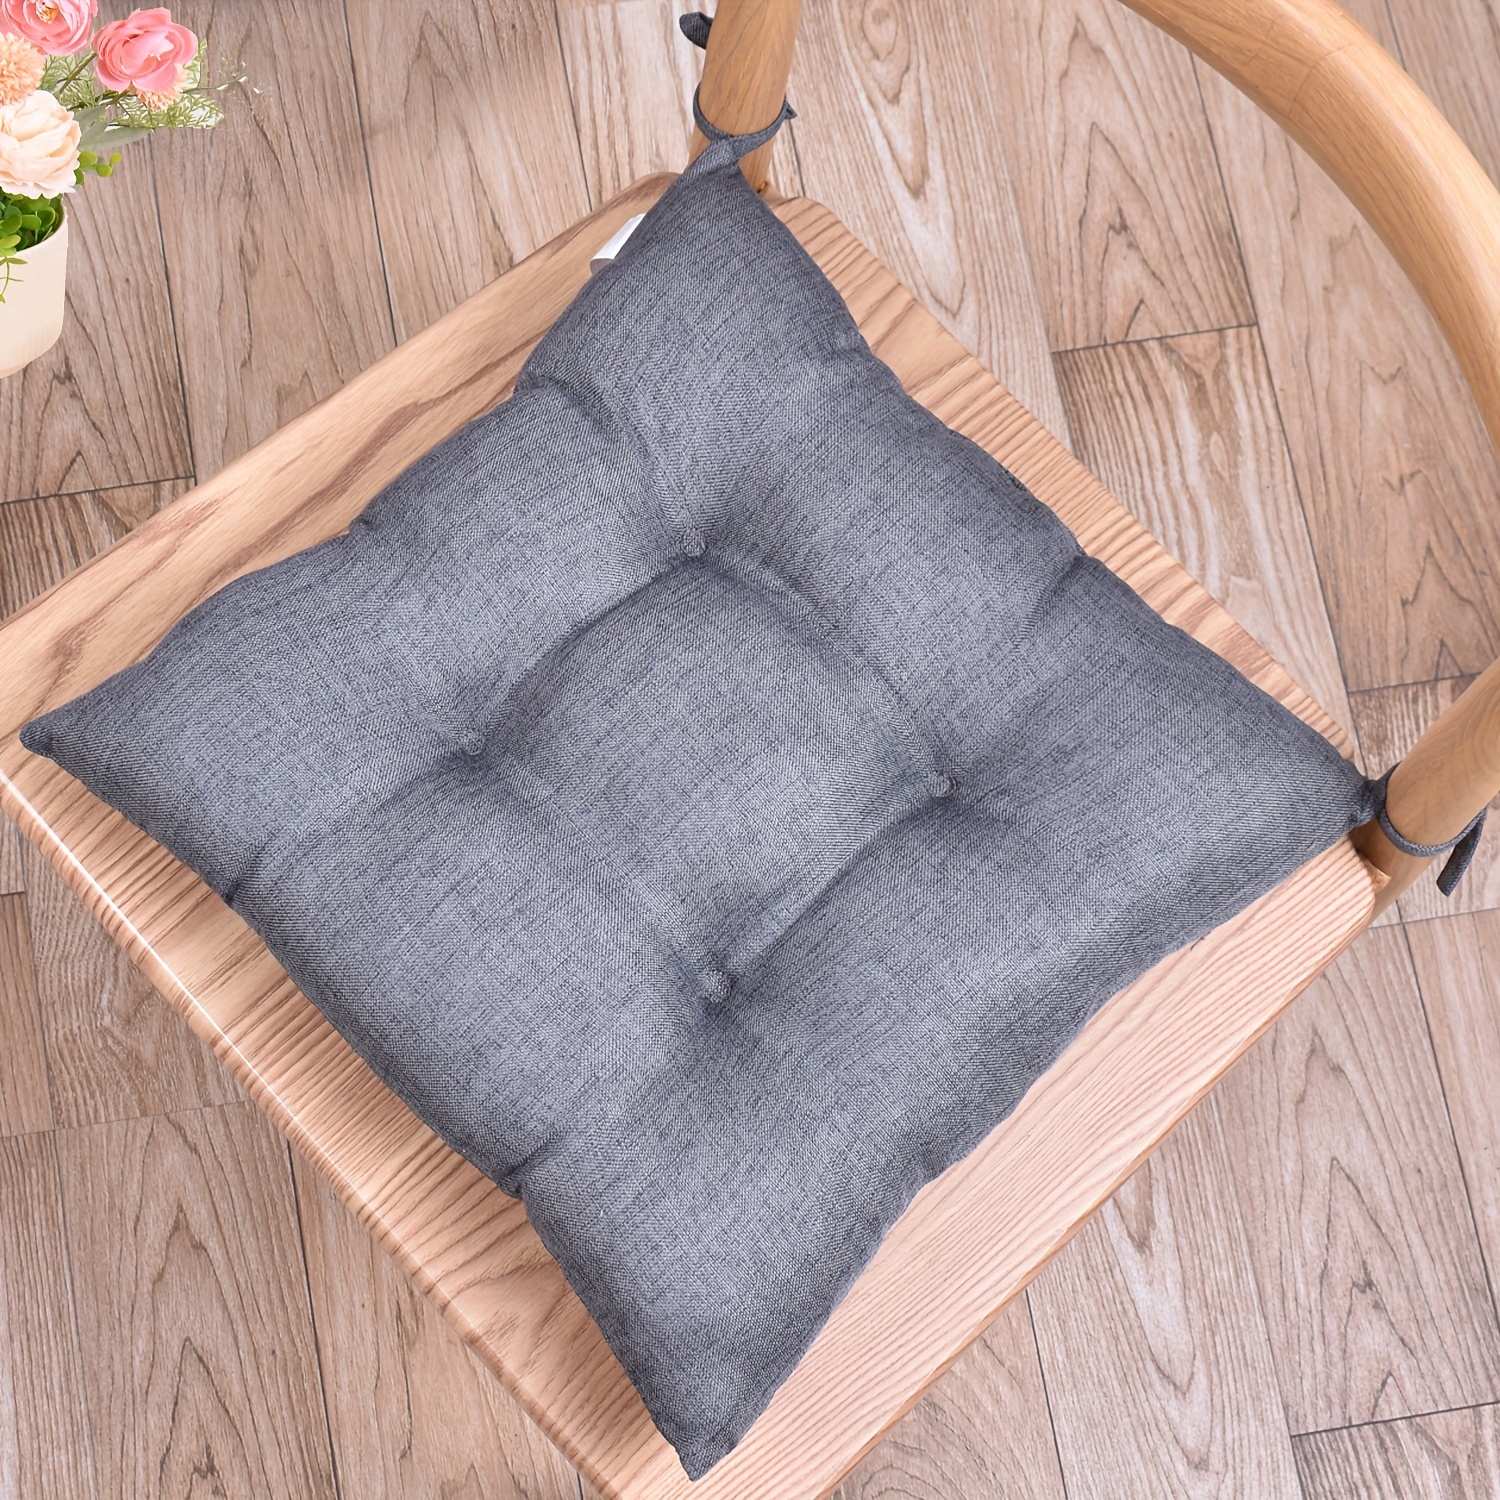 Square Fart Cushion, Portable Square Seat Cushions, Suitable For